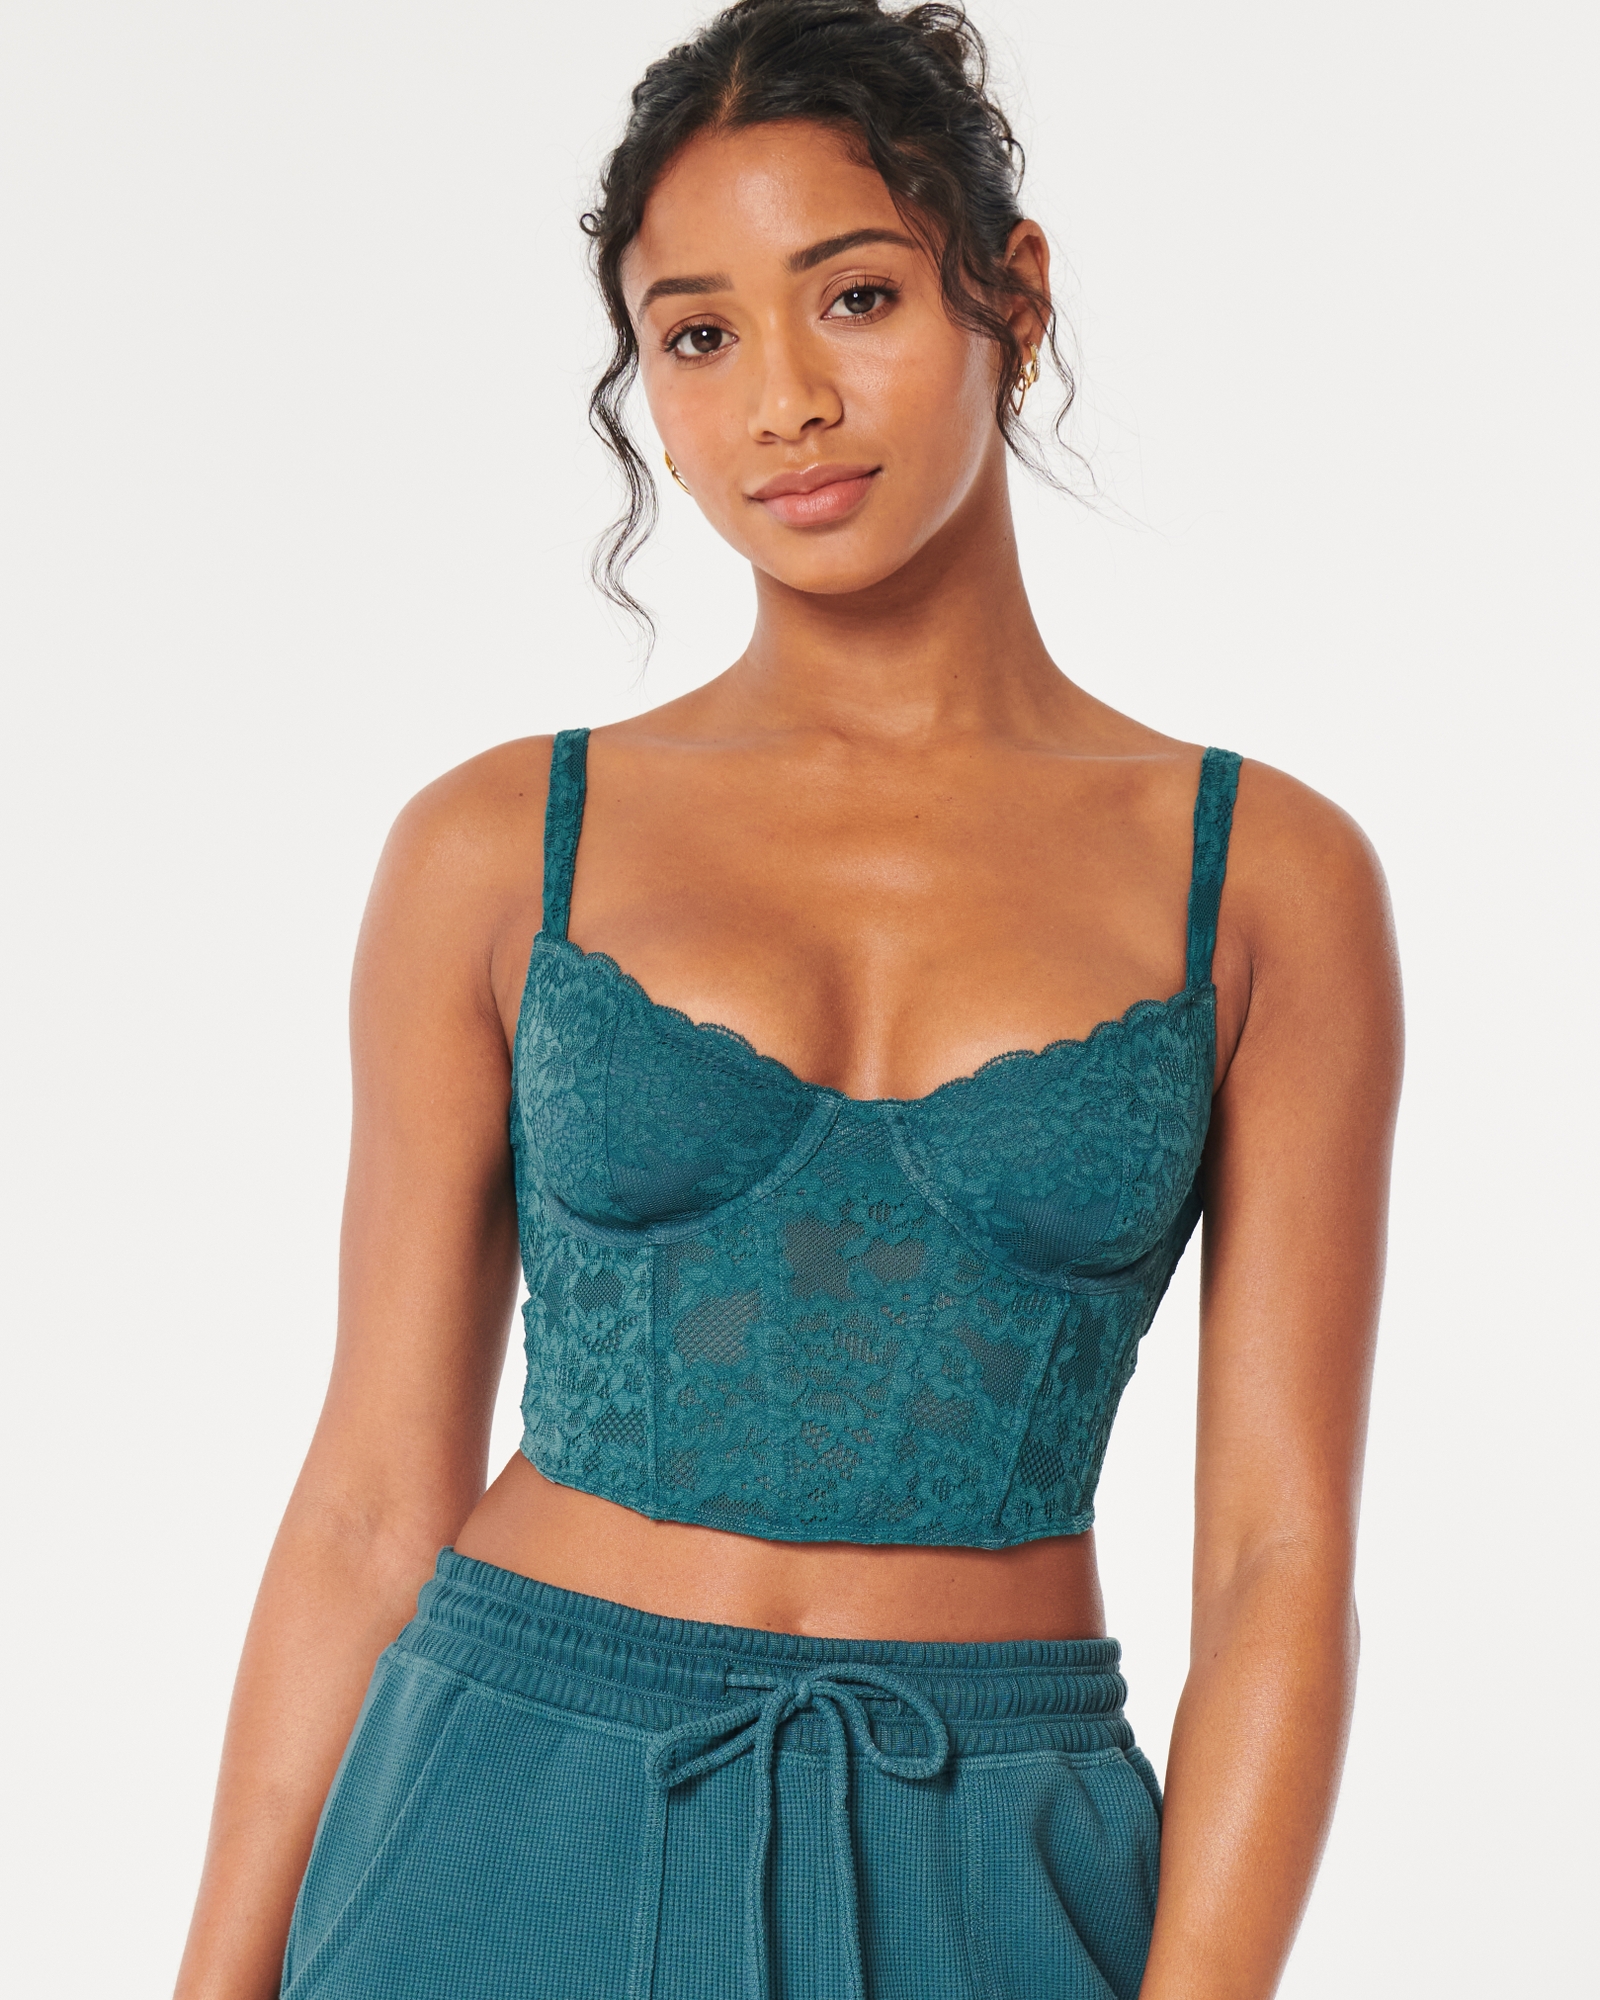 Women's Gilly Hicks Lace Bustier